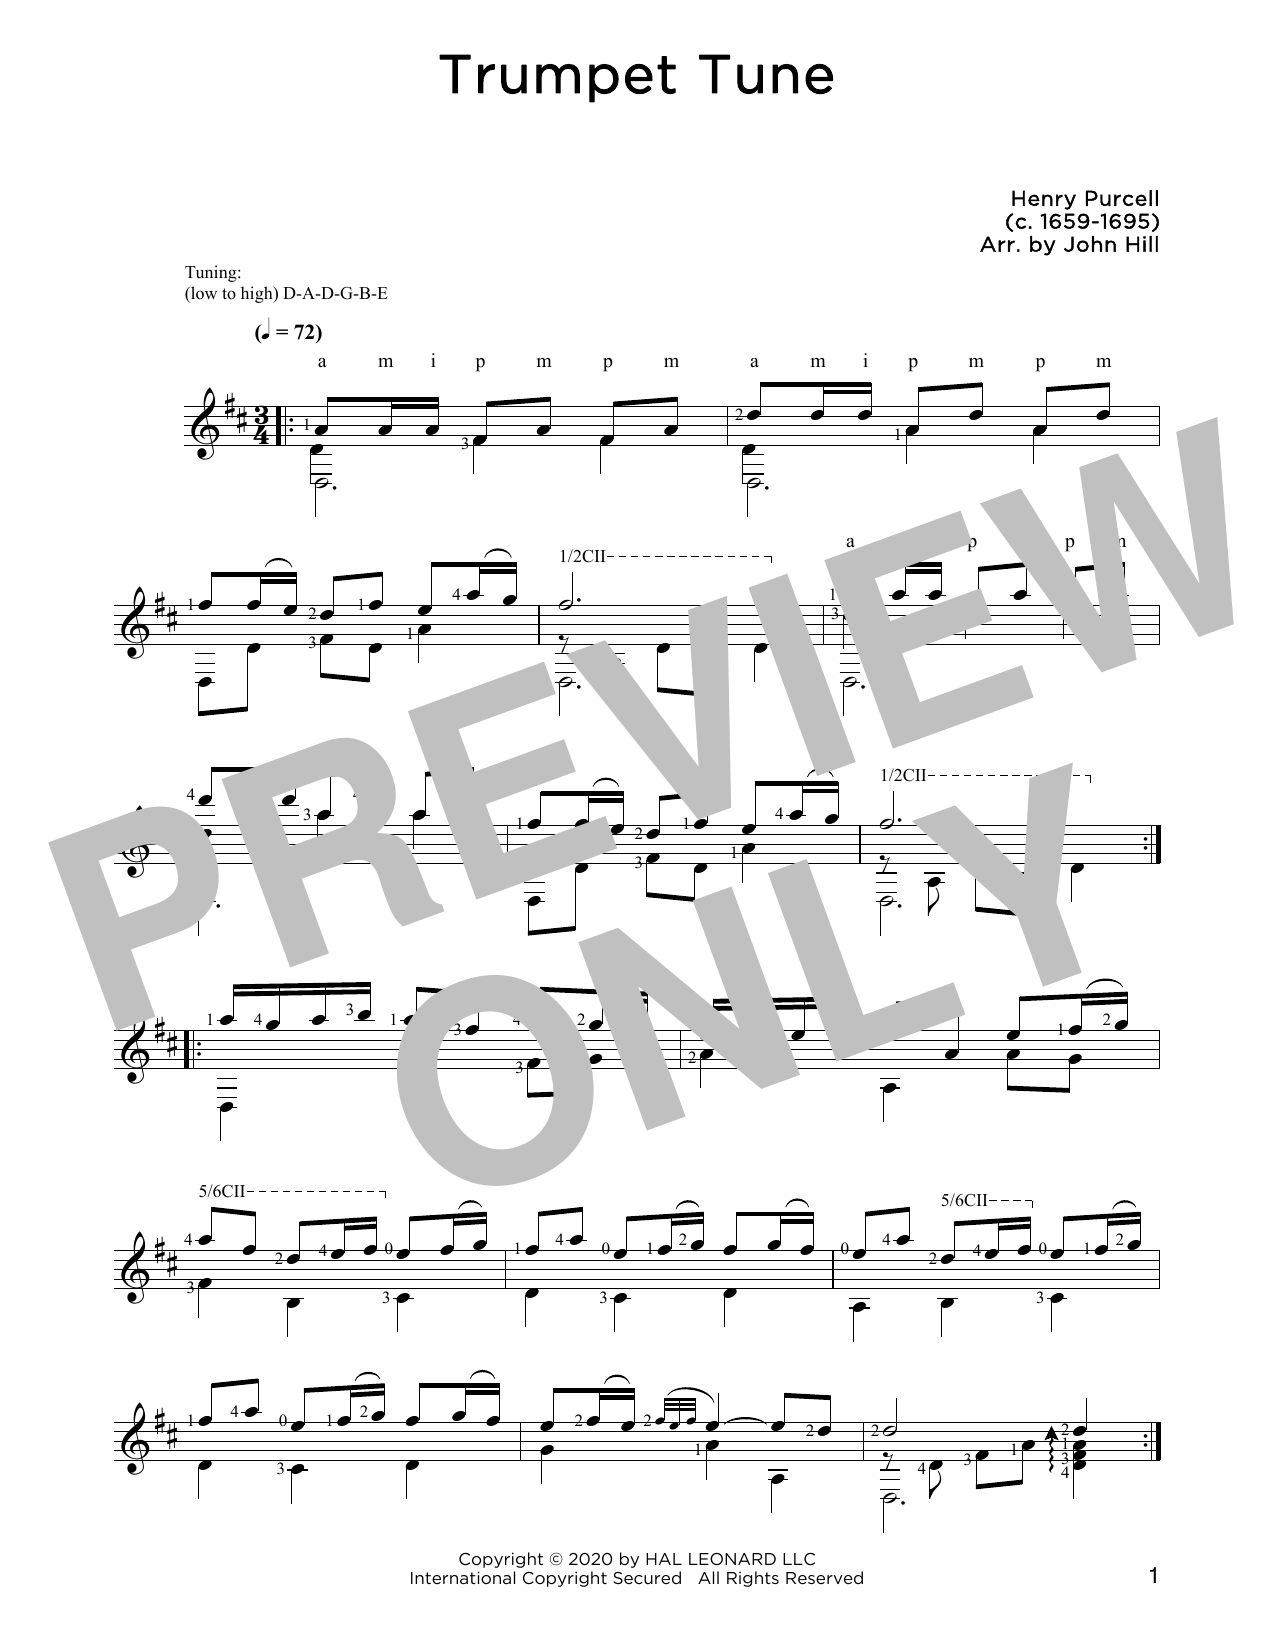 Download Henry Purcell Trumpet Tune Sheet Music